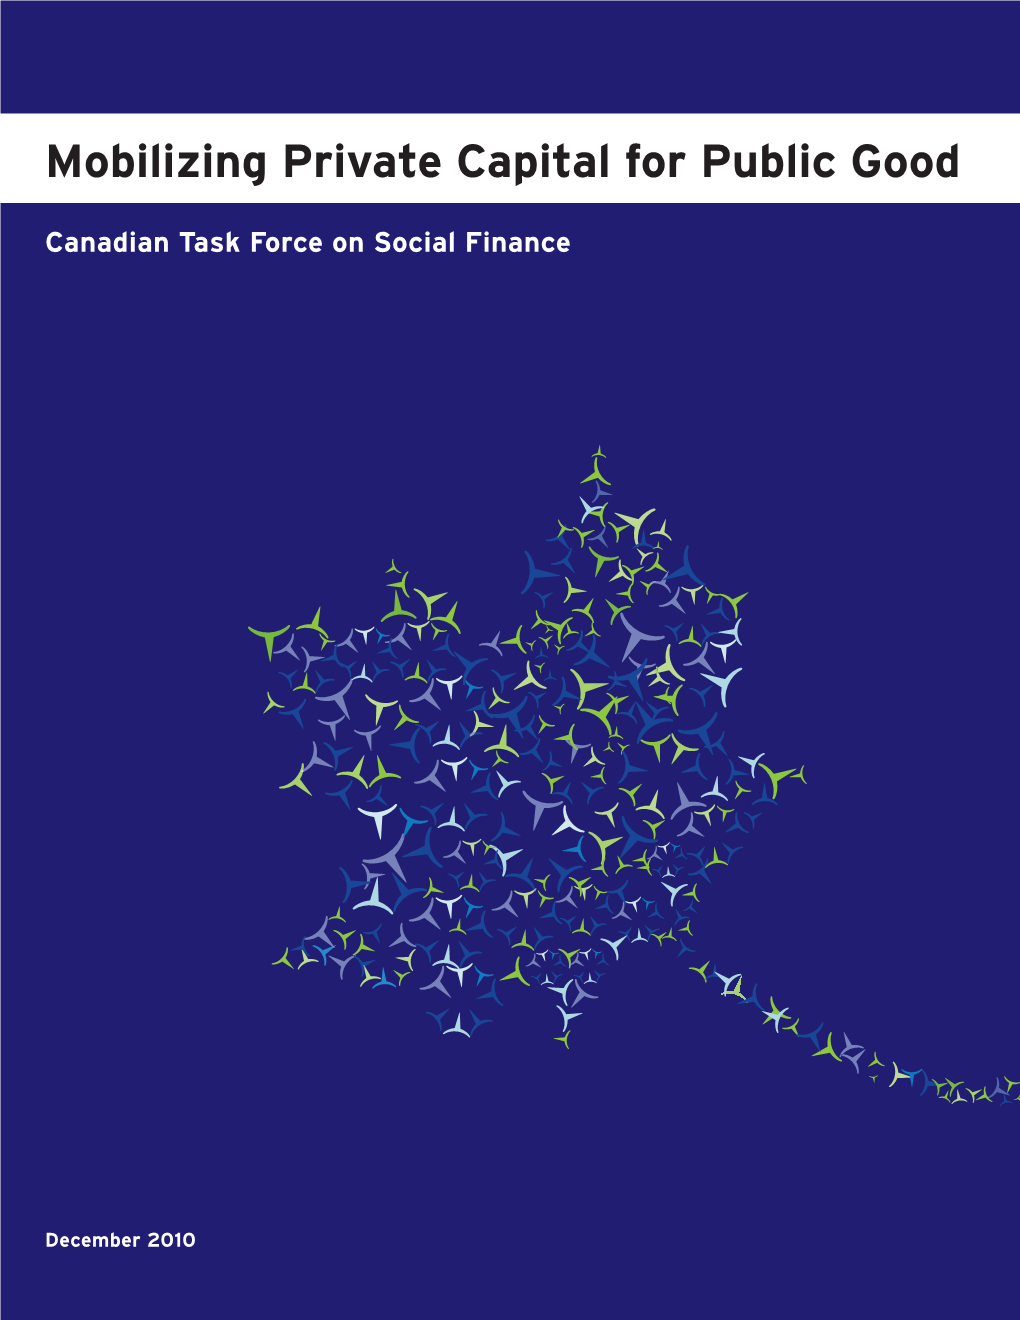 Mobilizing Private Capital for Public Good